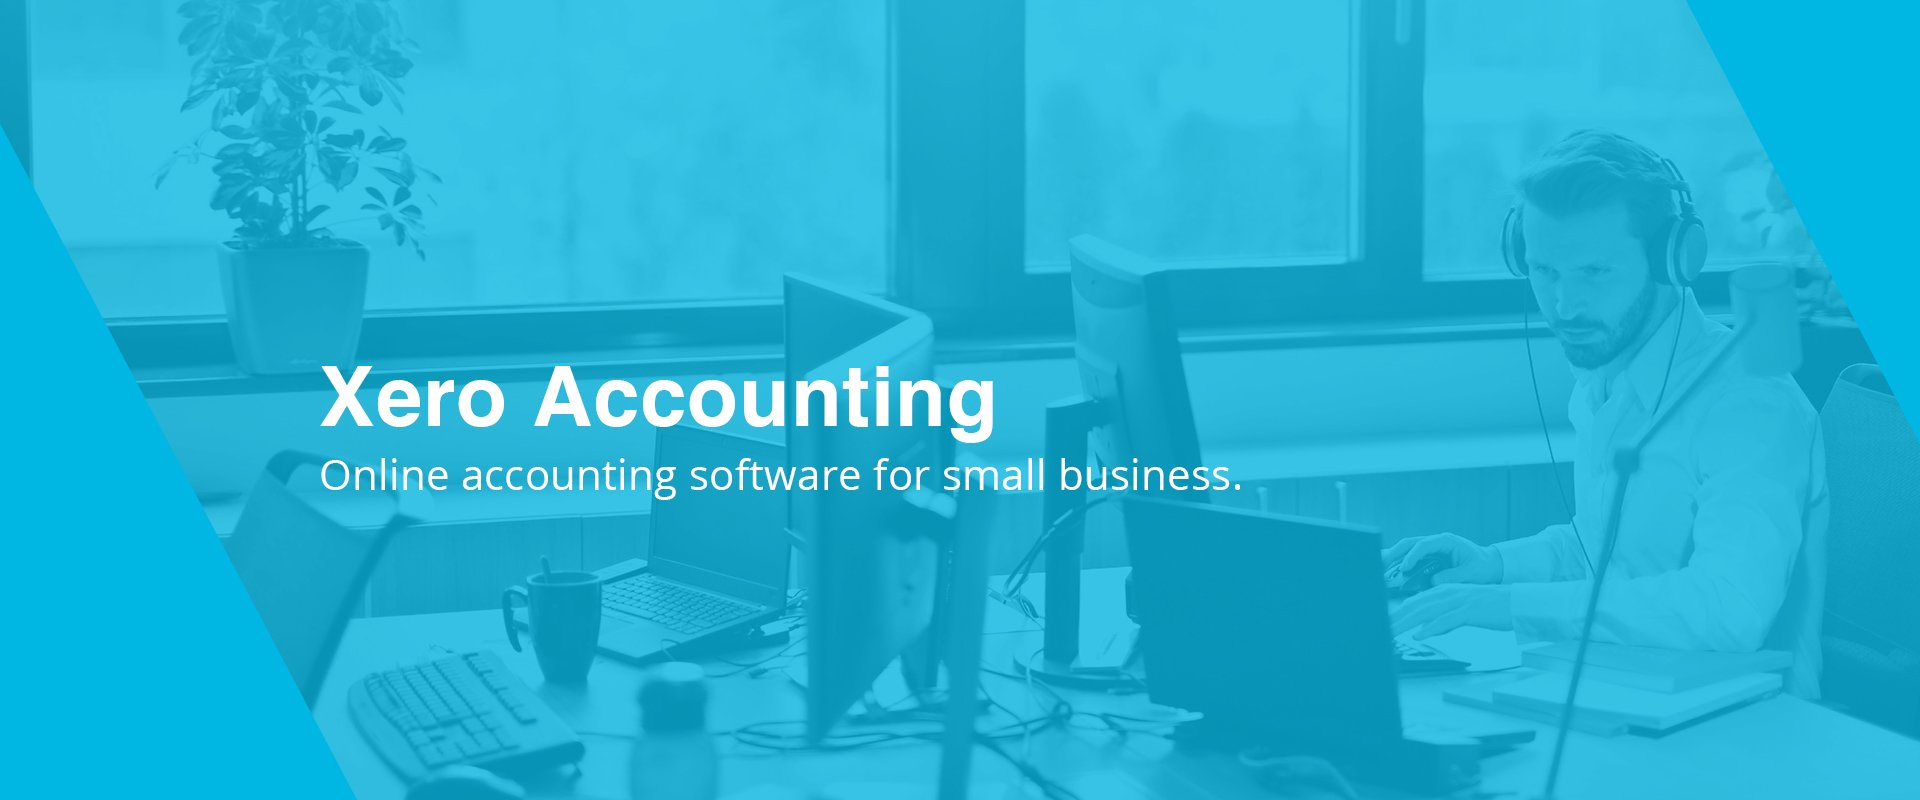 Xero Accounting - Online accounting software for small businesses